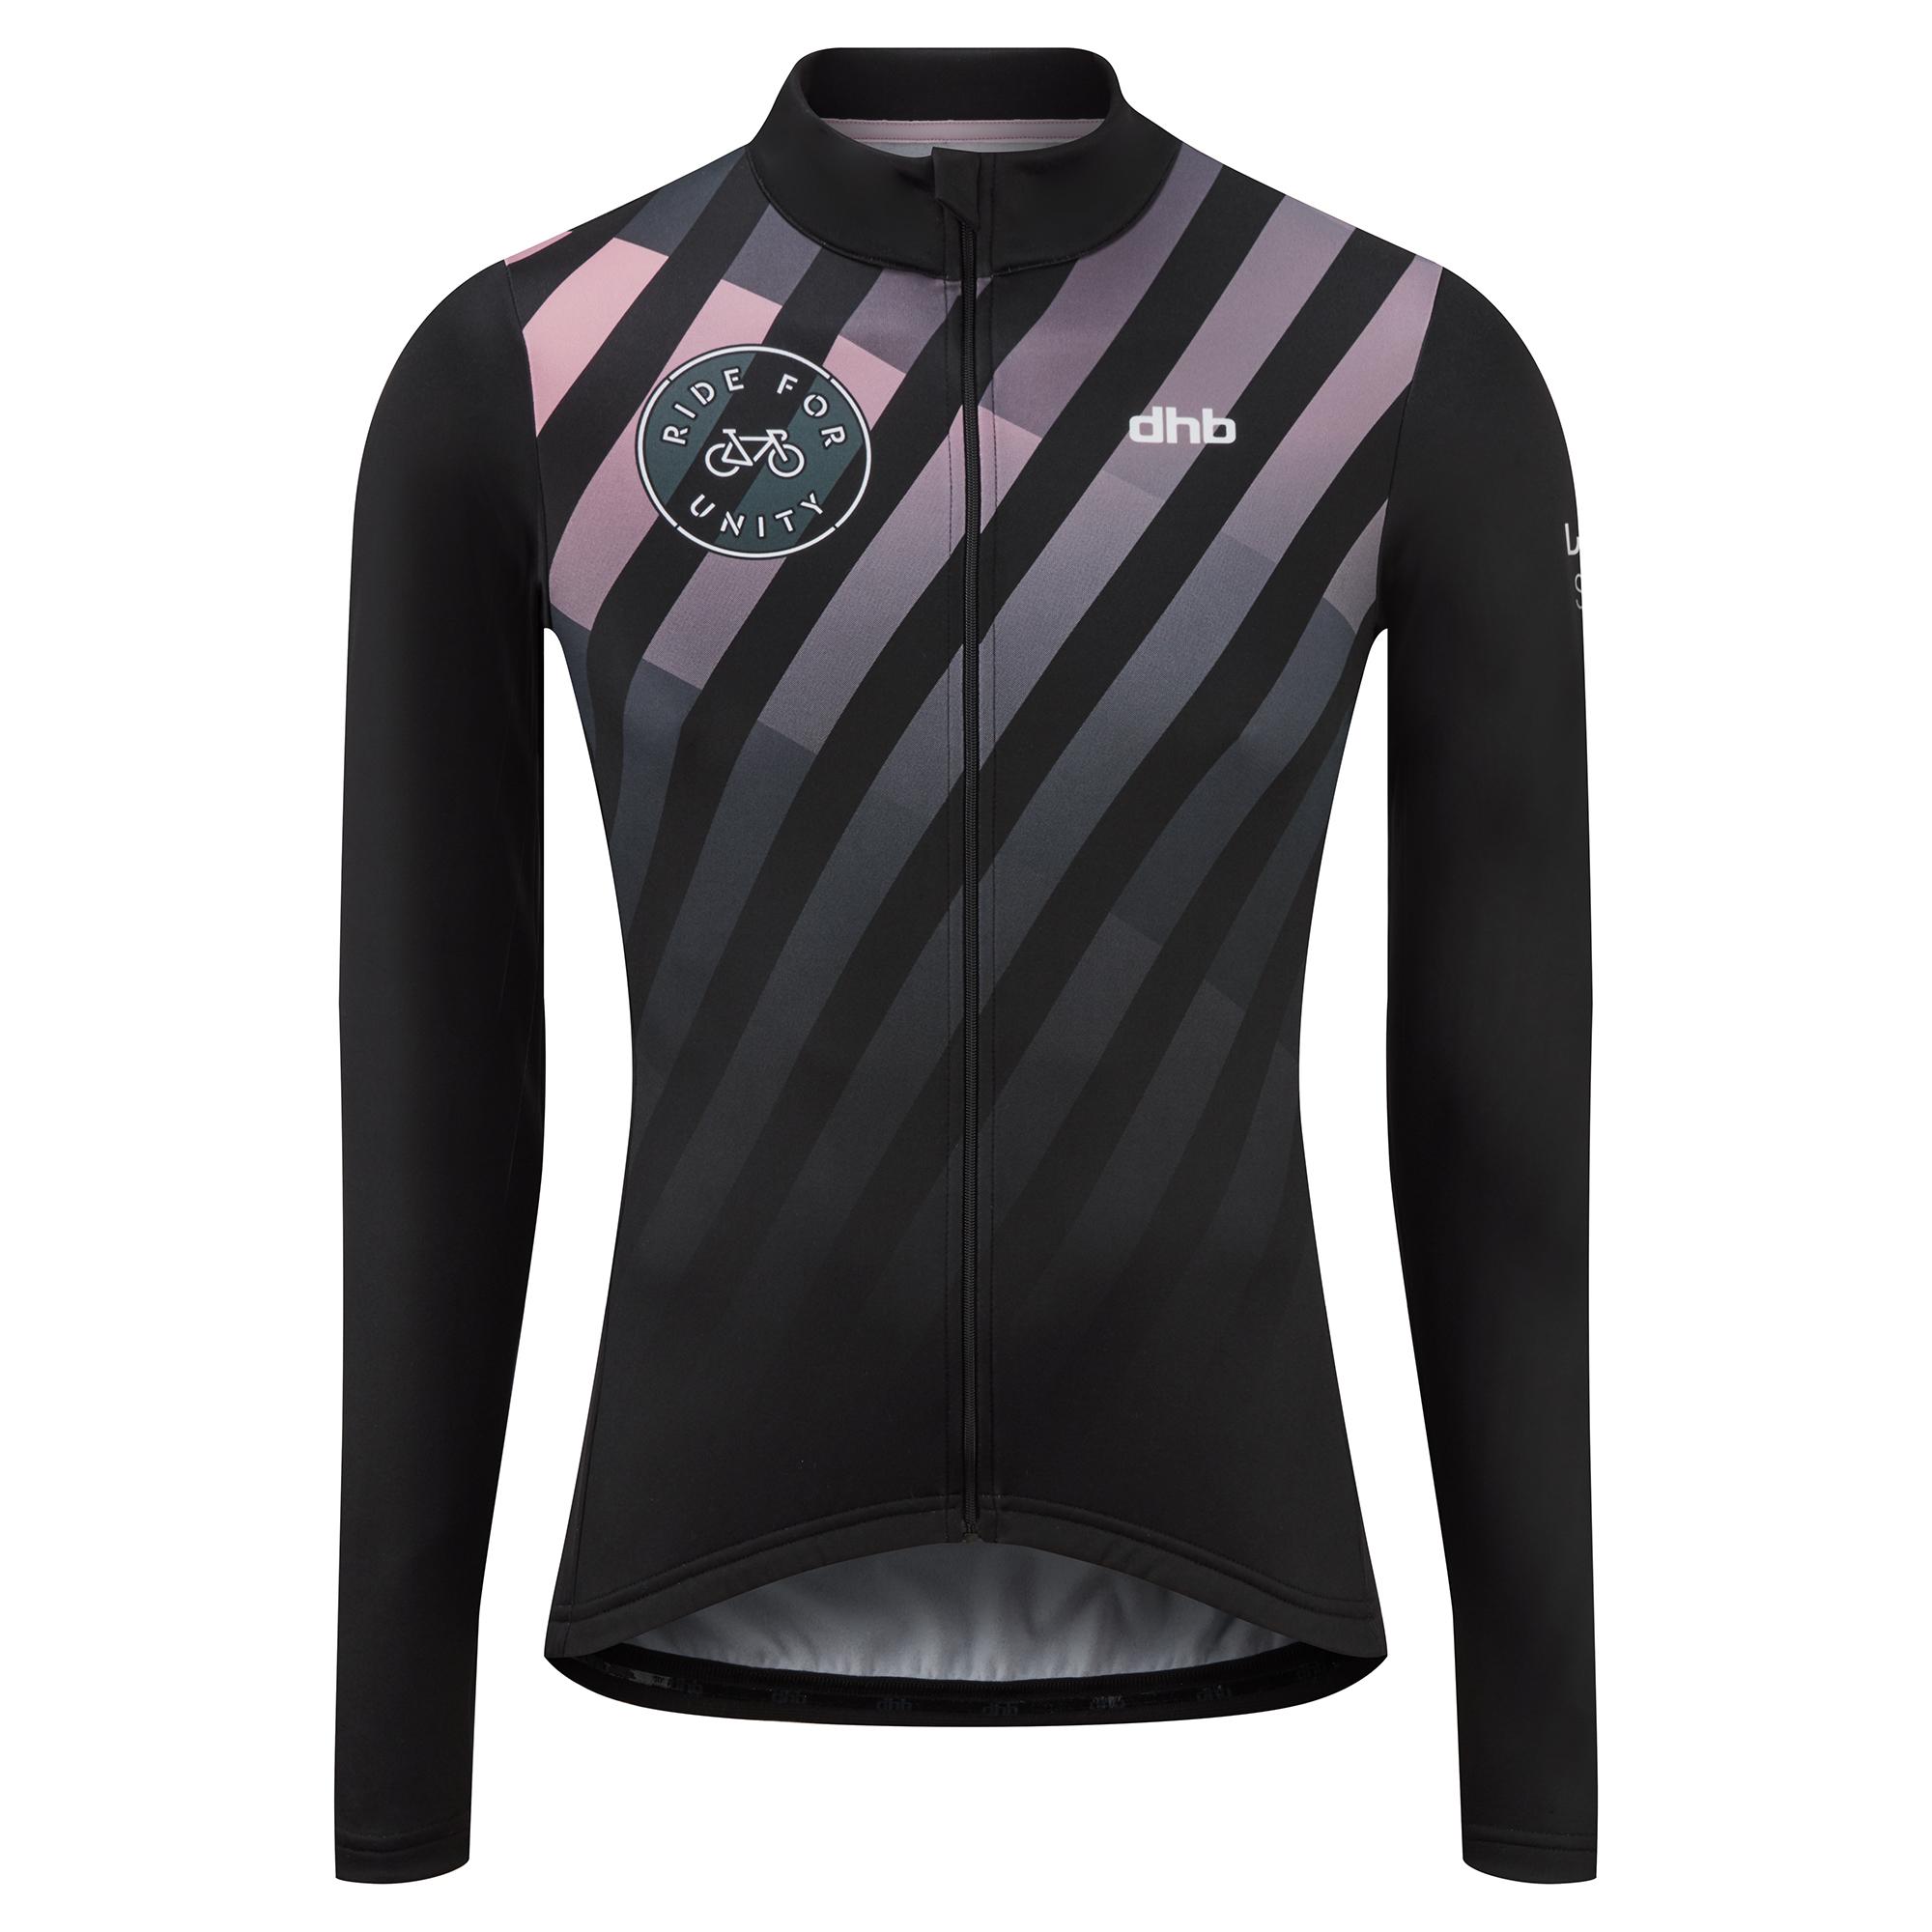 Dhb Ride For Unity Long Sleeve Jersey - Black/pink